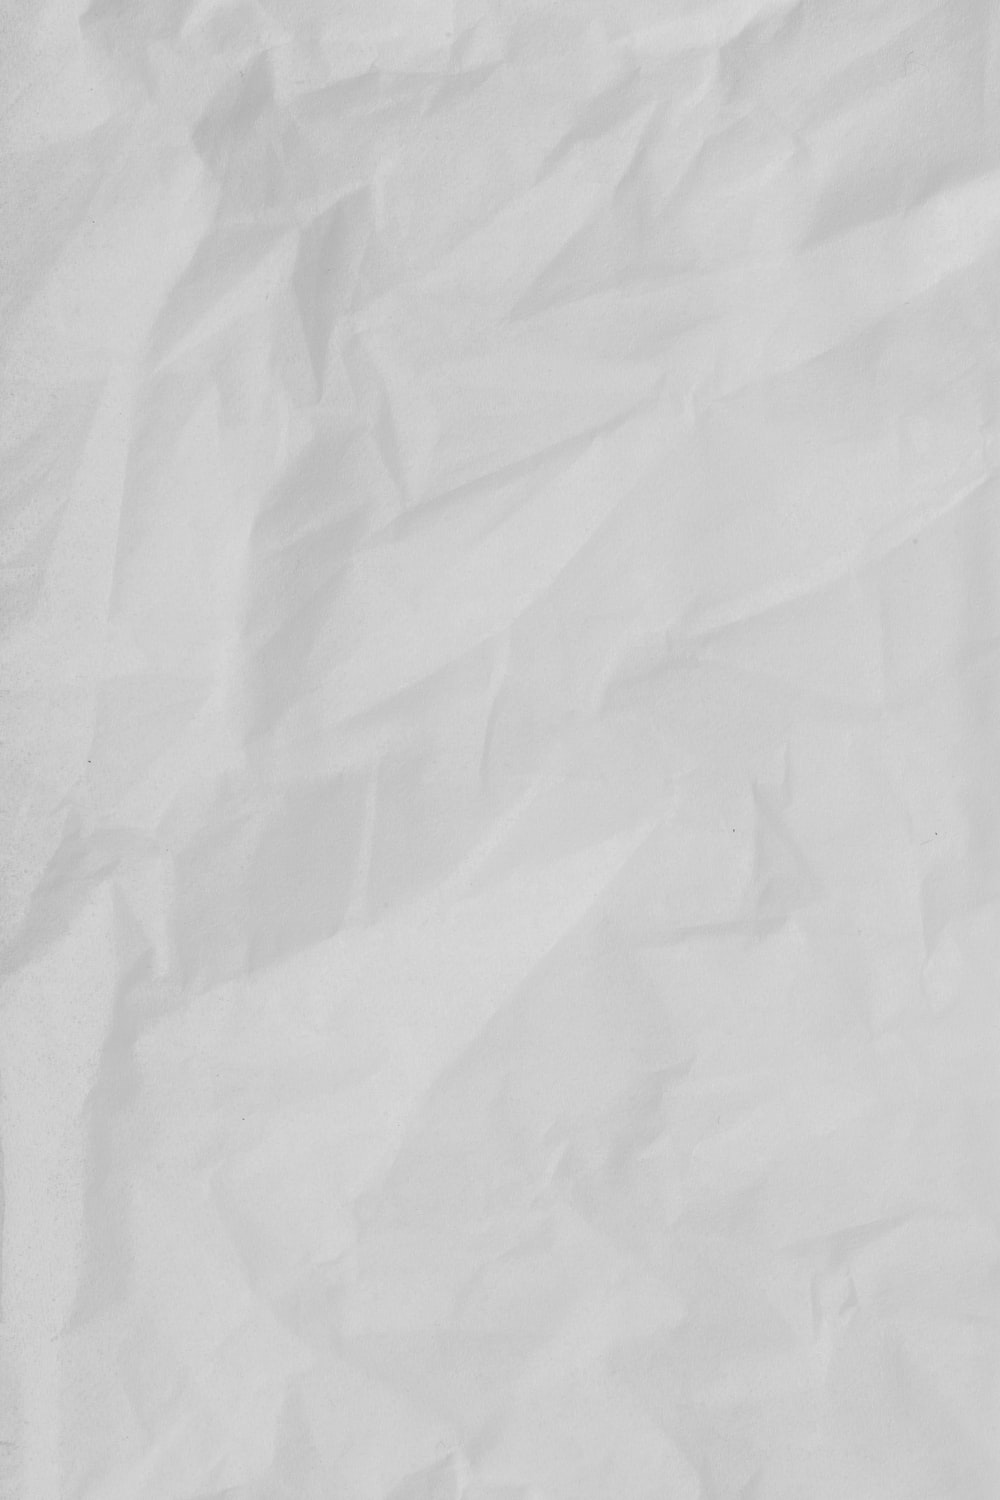 Paper Texture Pictures HD Image